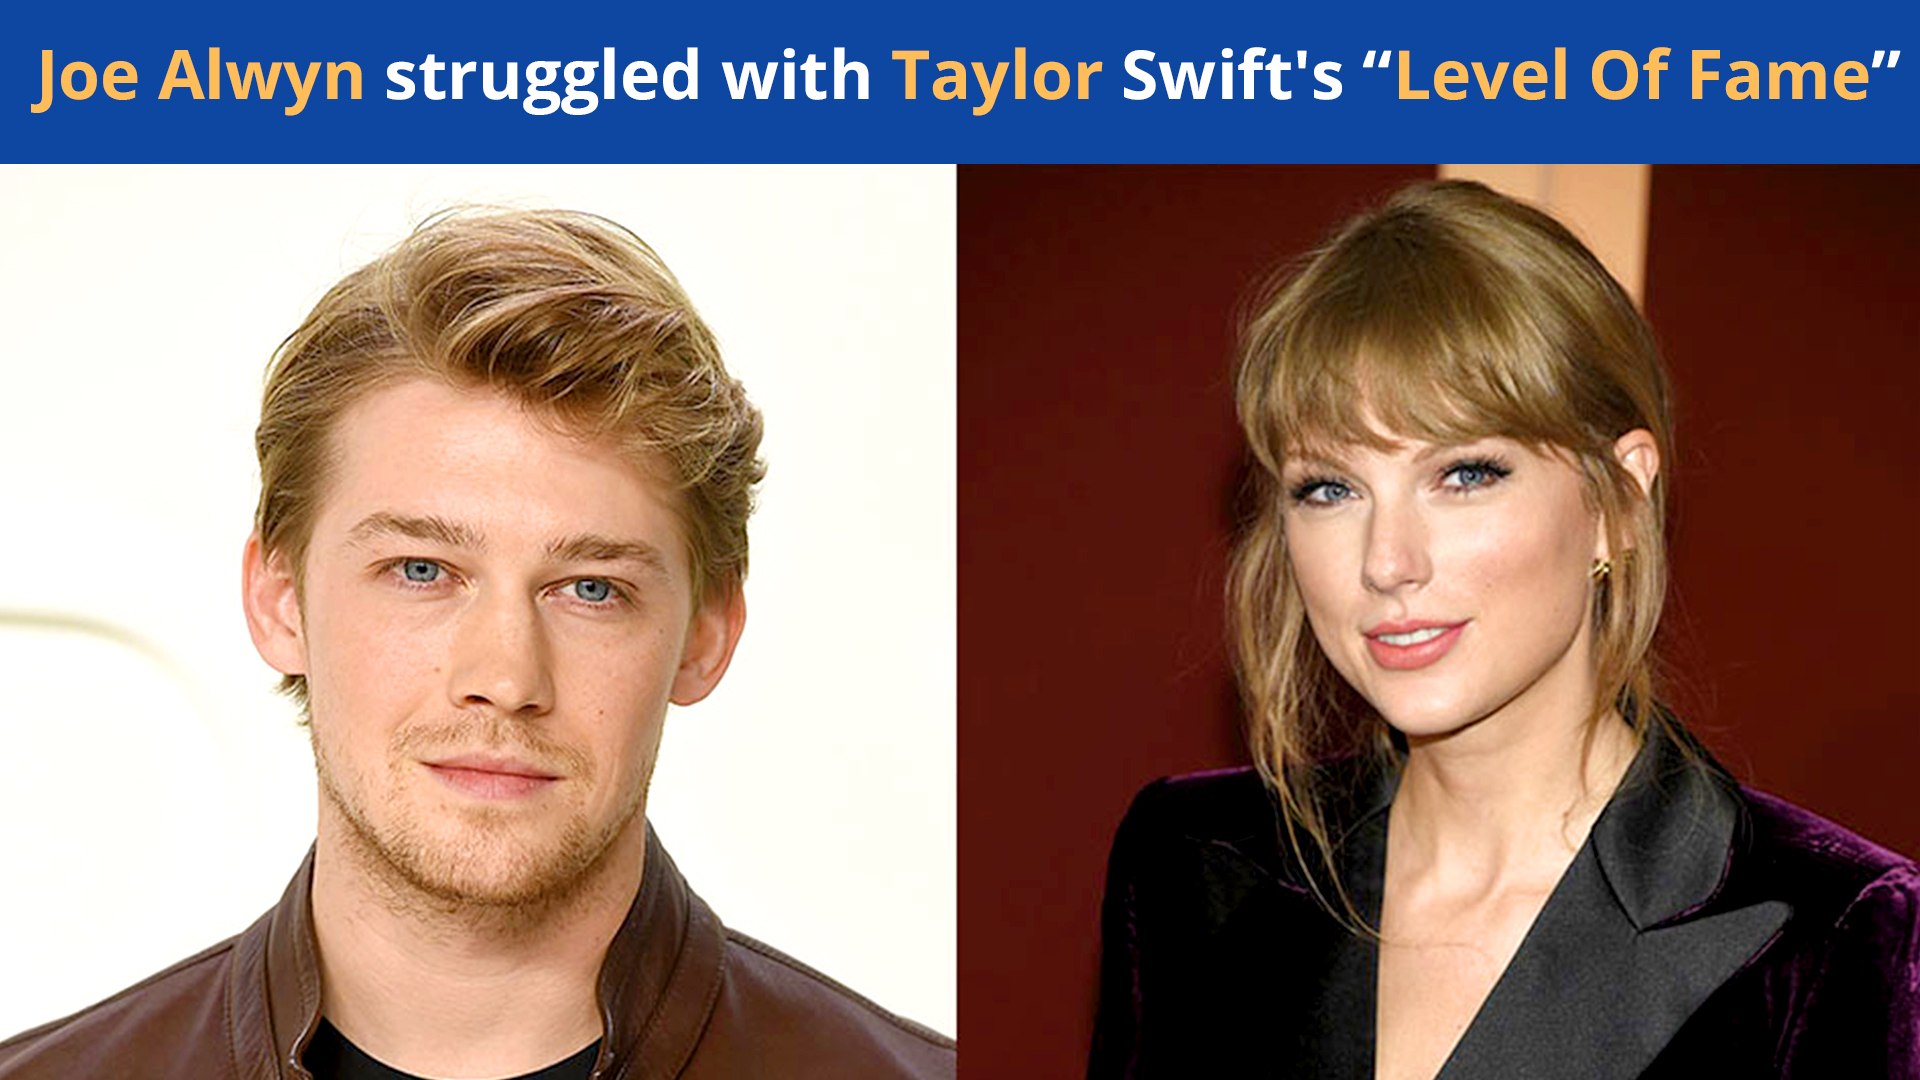 Joe Alwyn Struggle With Taylor Swifts Fame And Attention From Fans?